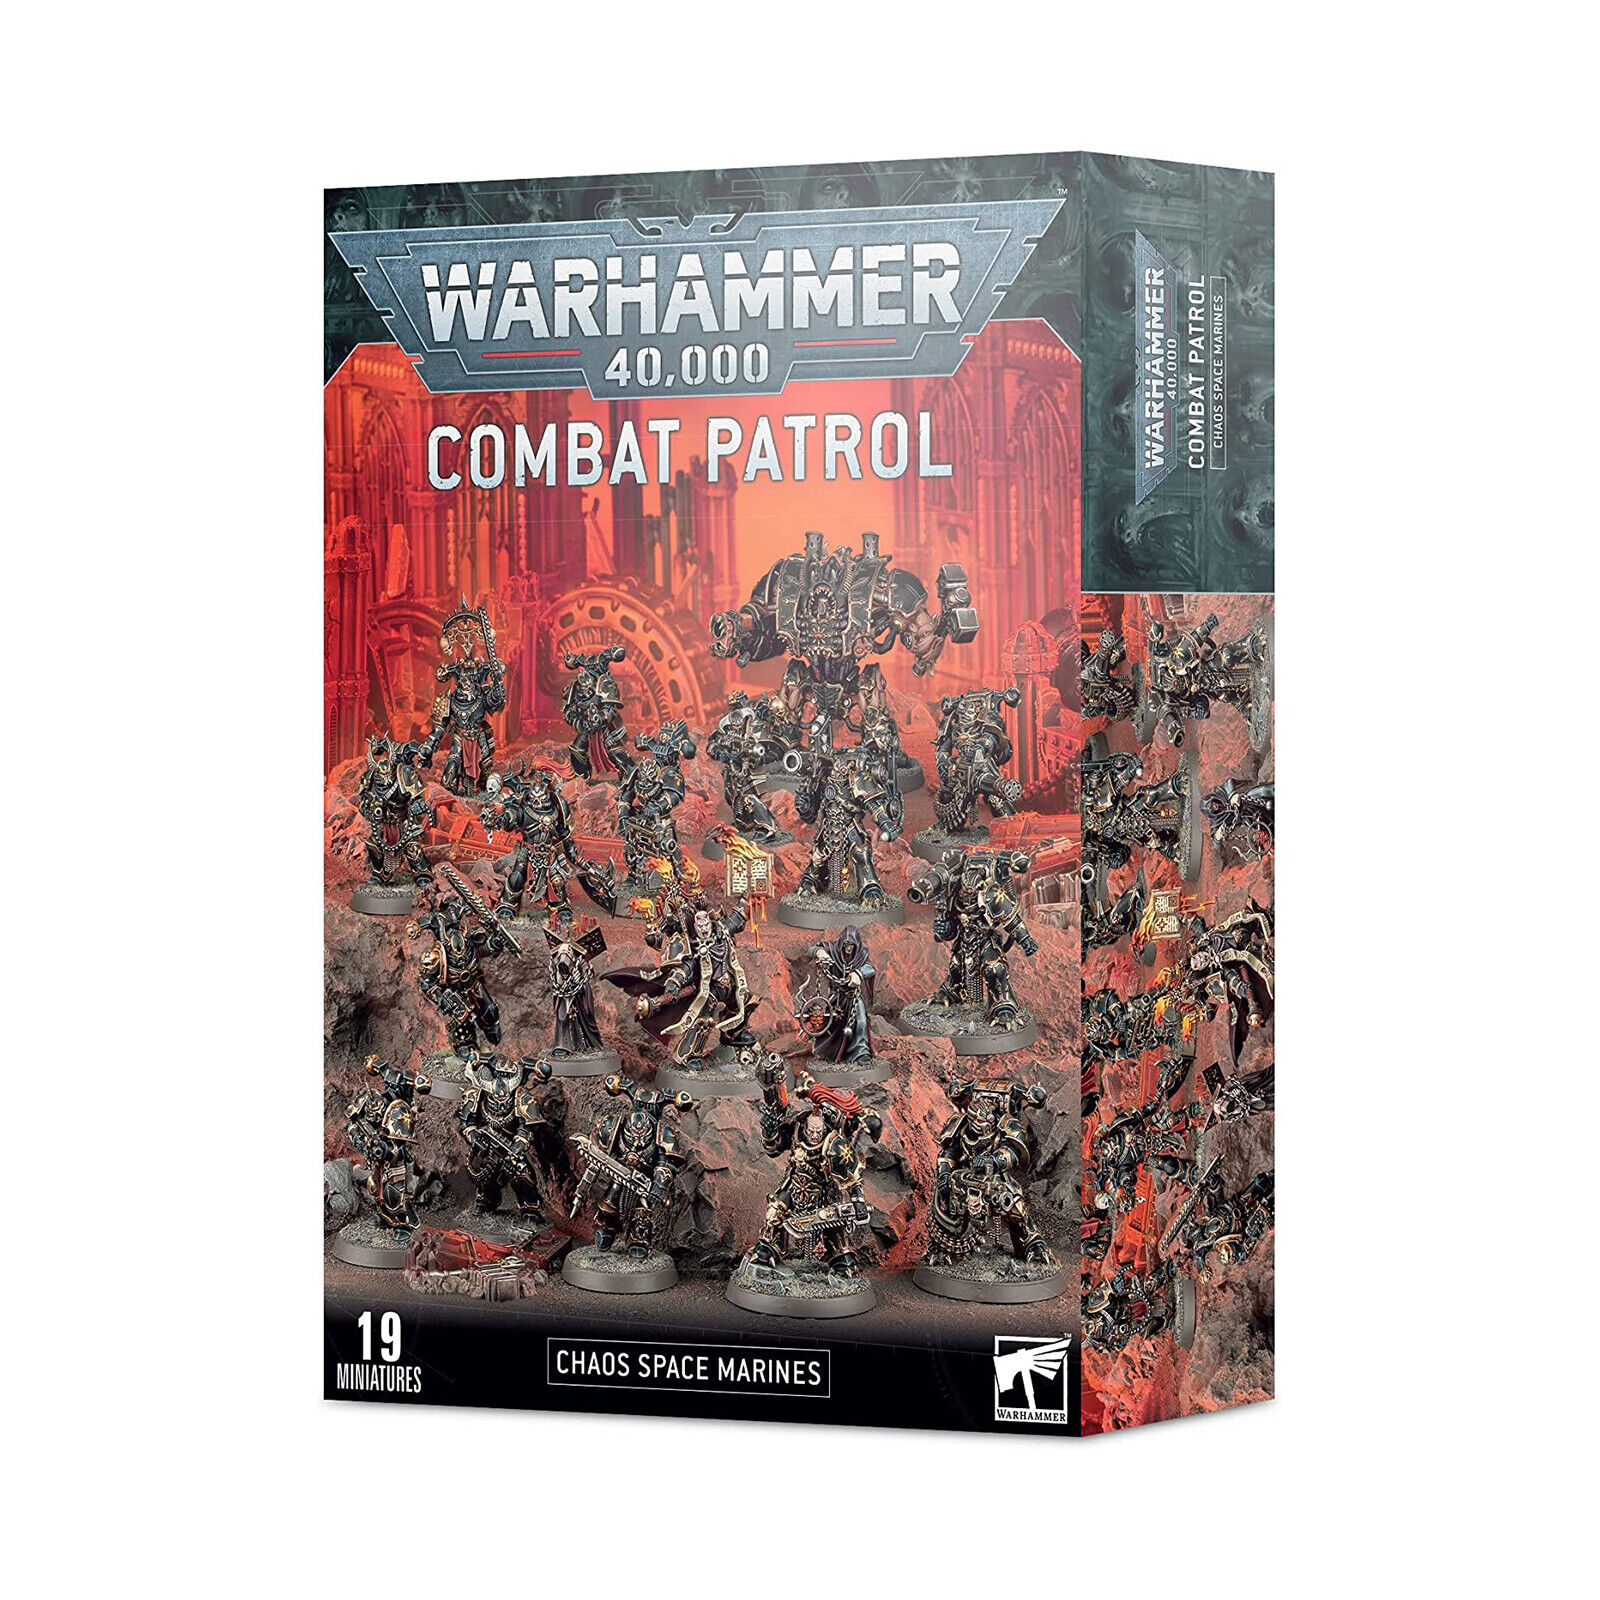 Warhammer 40,000 Combat Patrol Chaos Space Marines Building Set New In Stock